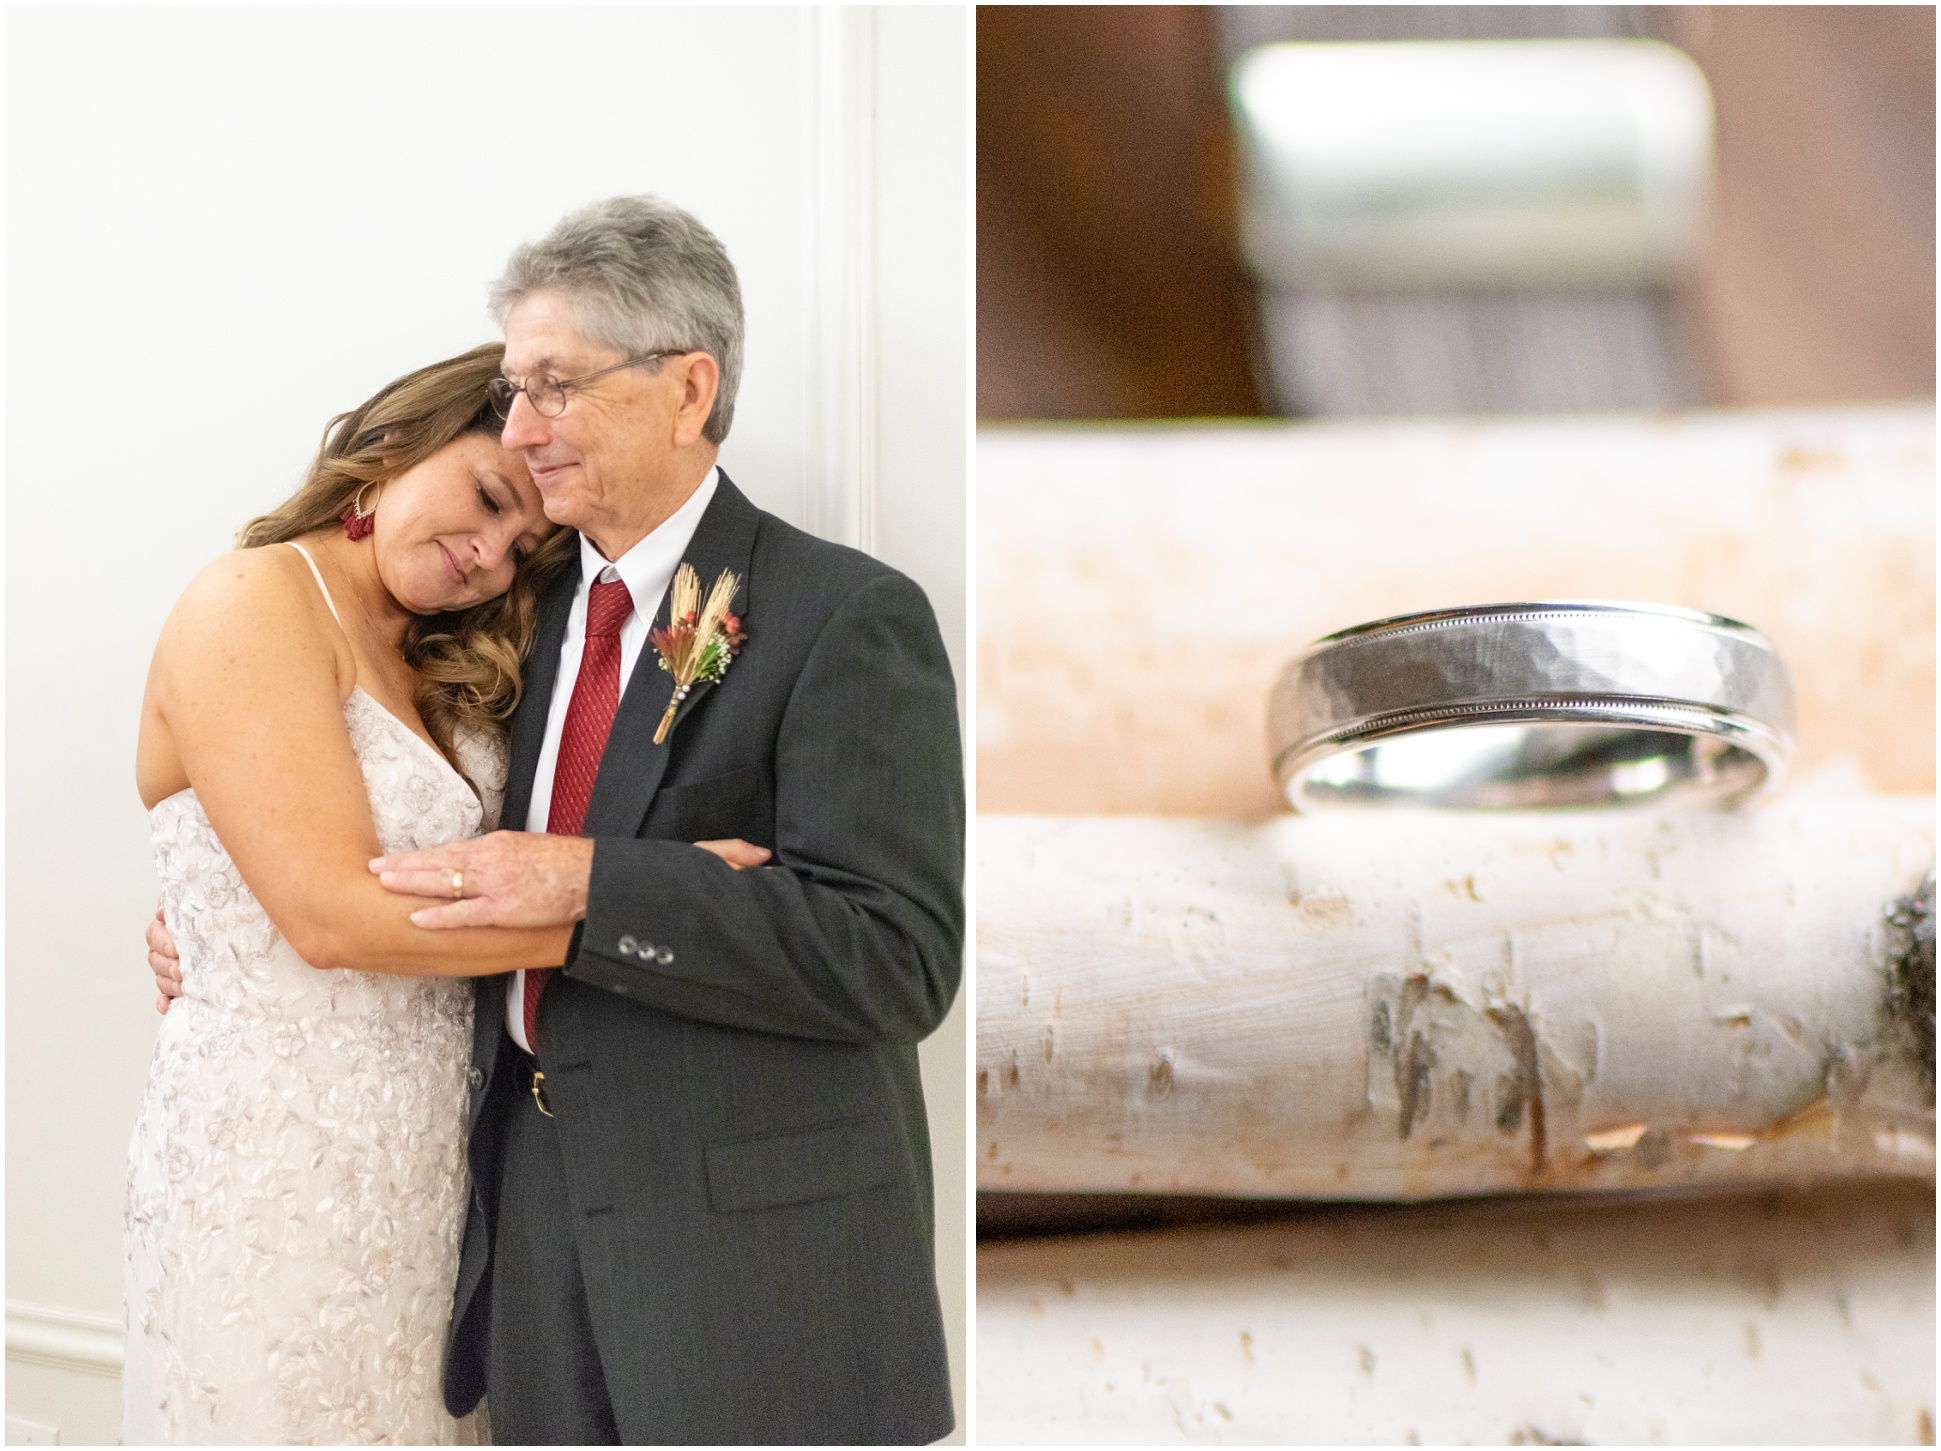 Left: Bride and Dad Portrait, Right: Groom's Ring